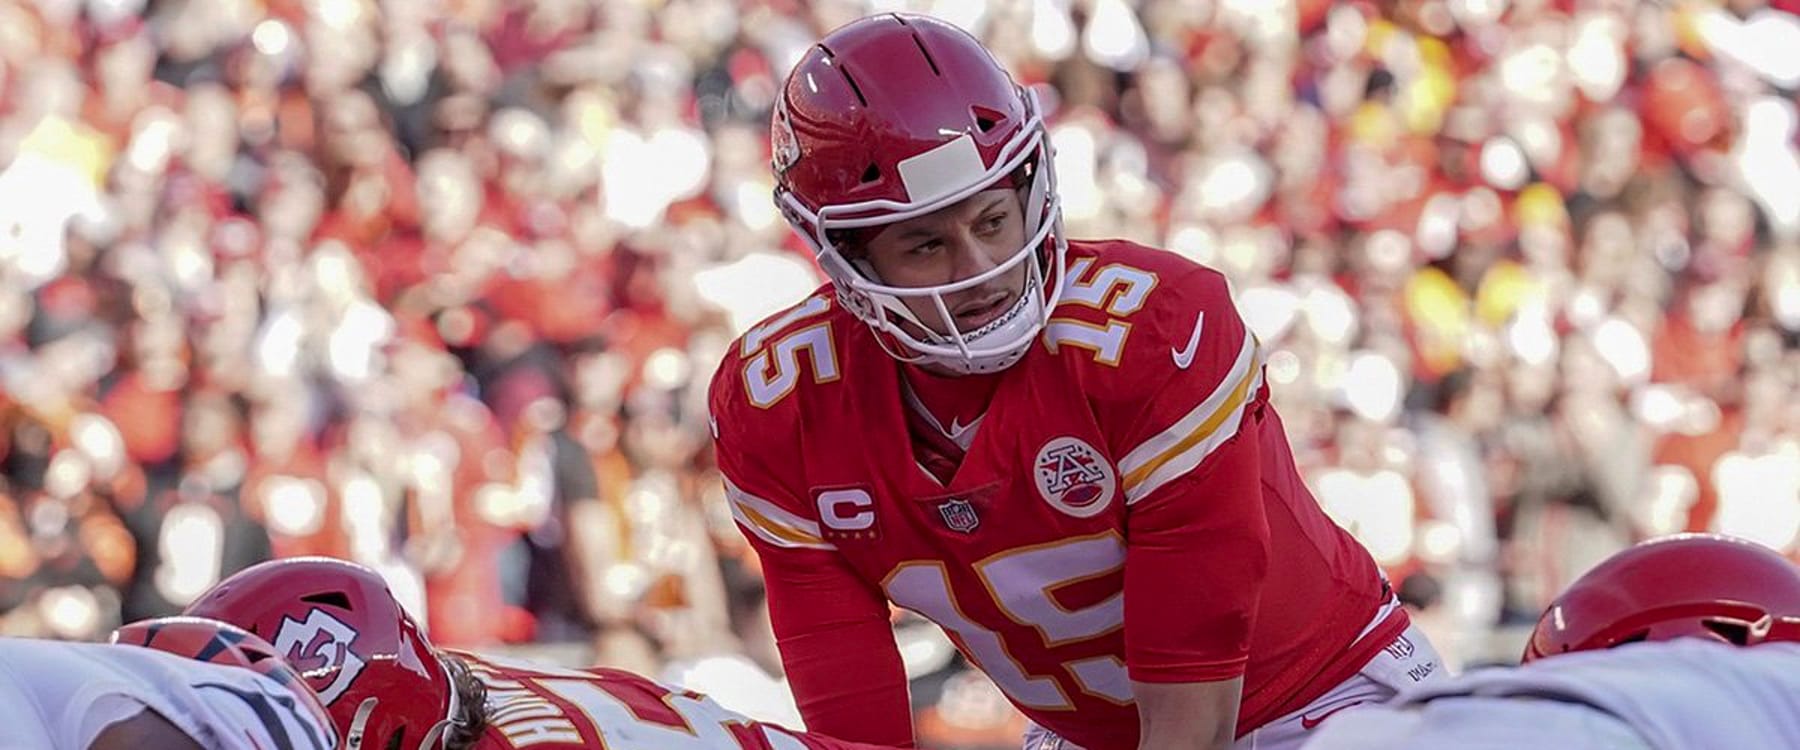 Mahomes or Allen: Who should be first fantasy QB off the board?